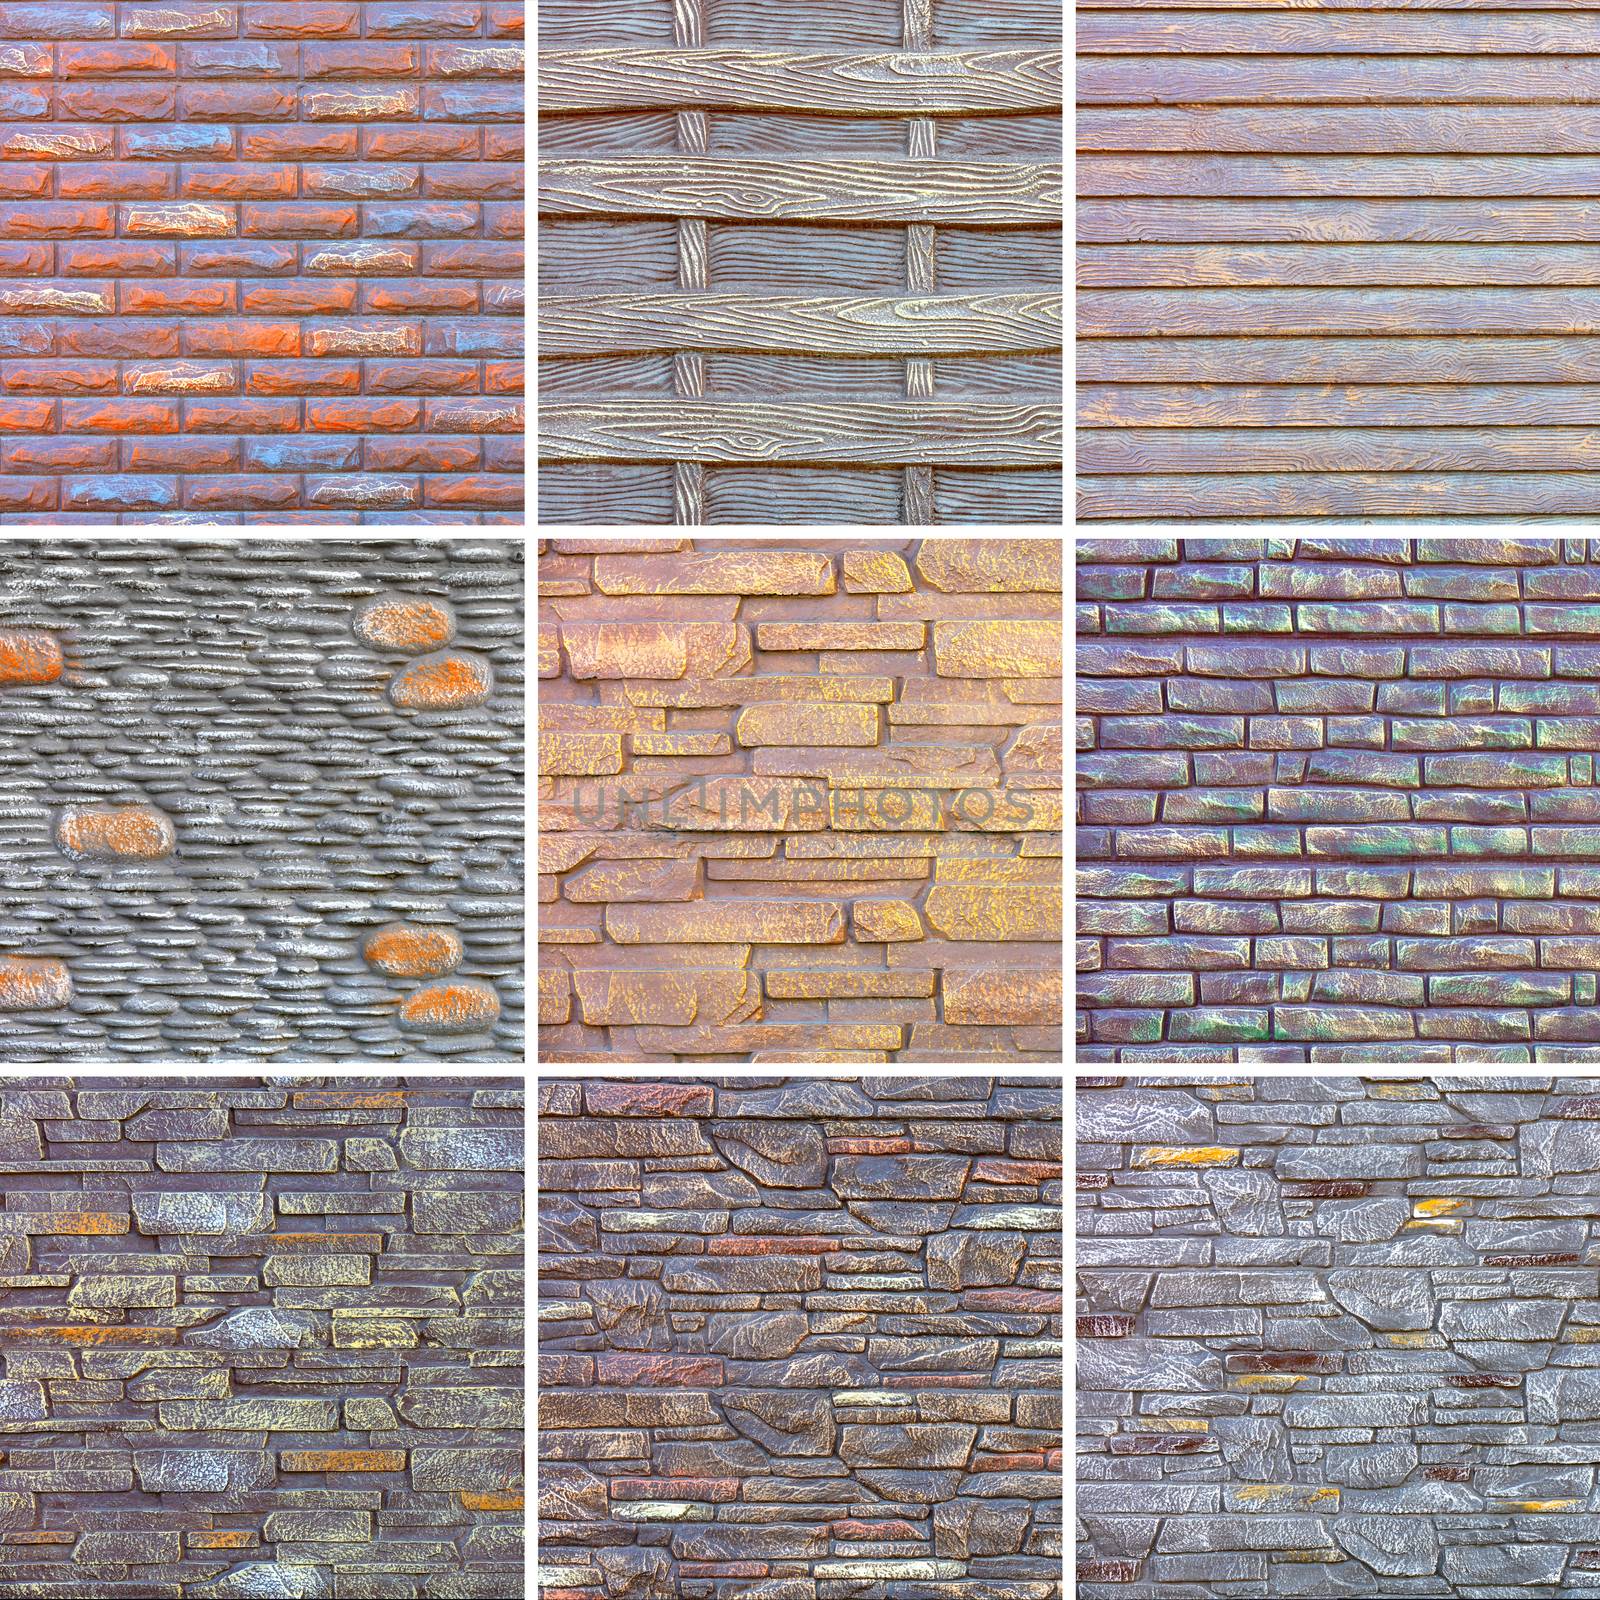 Collage of various concrete textures made in a decorative style. by Sergii